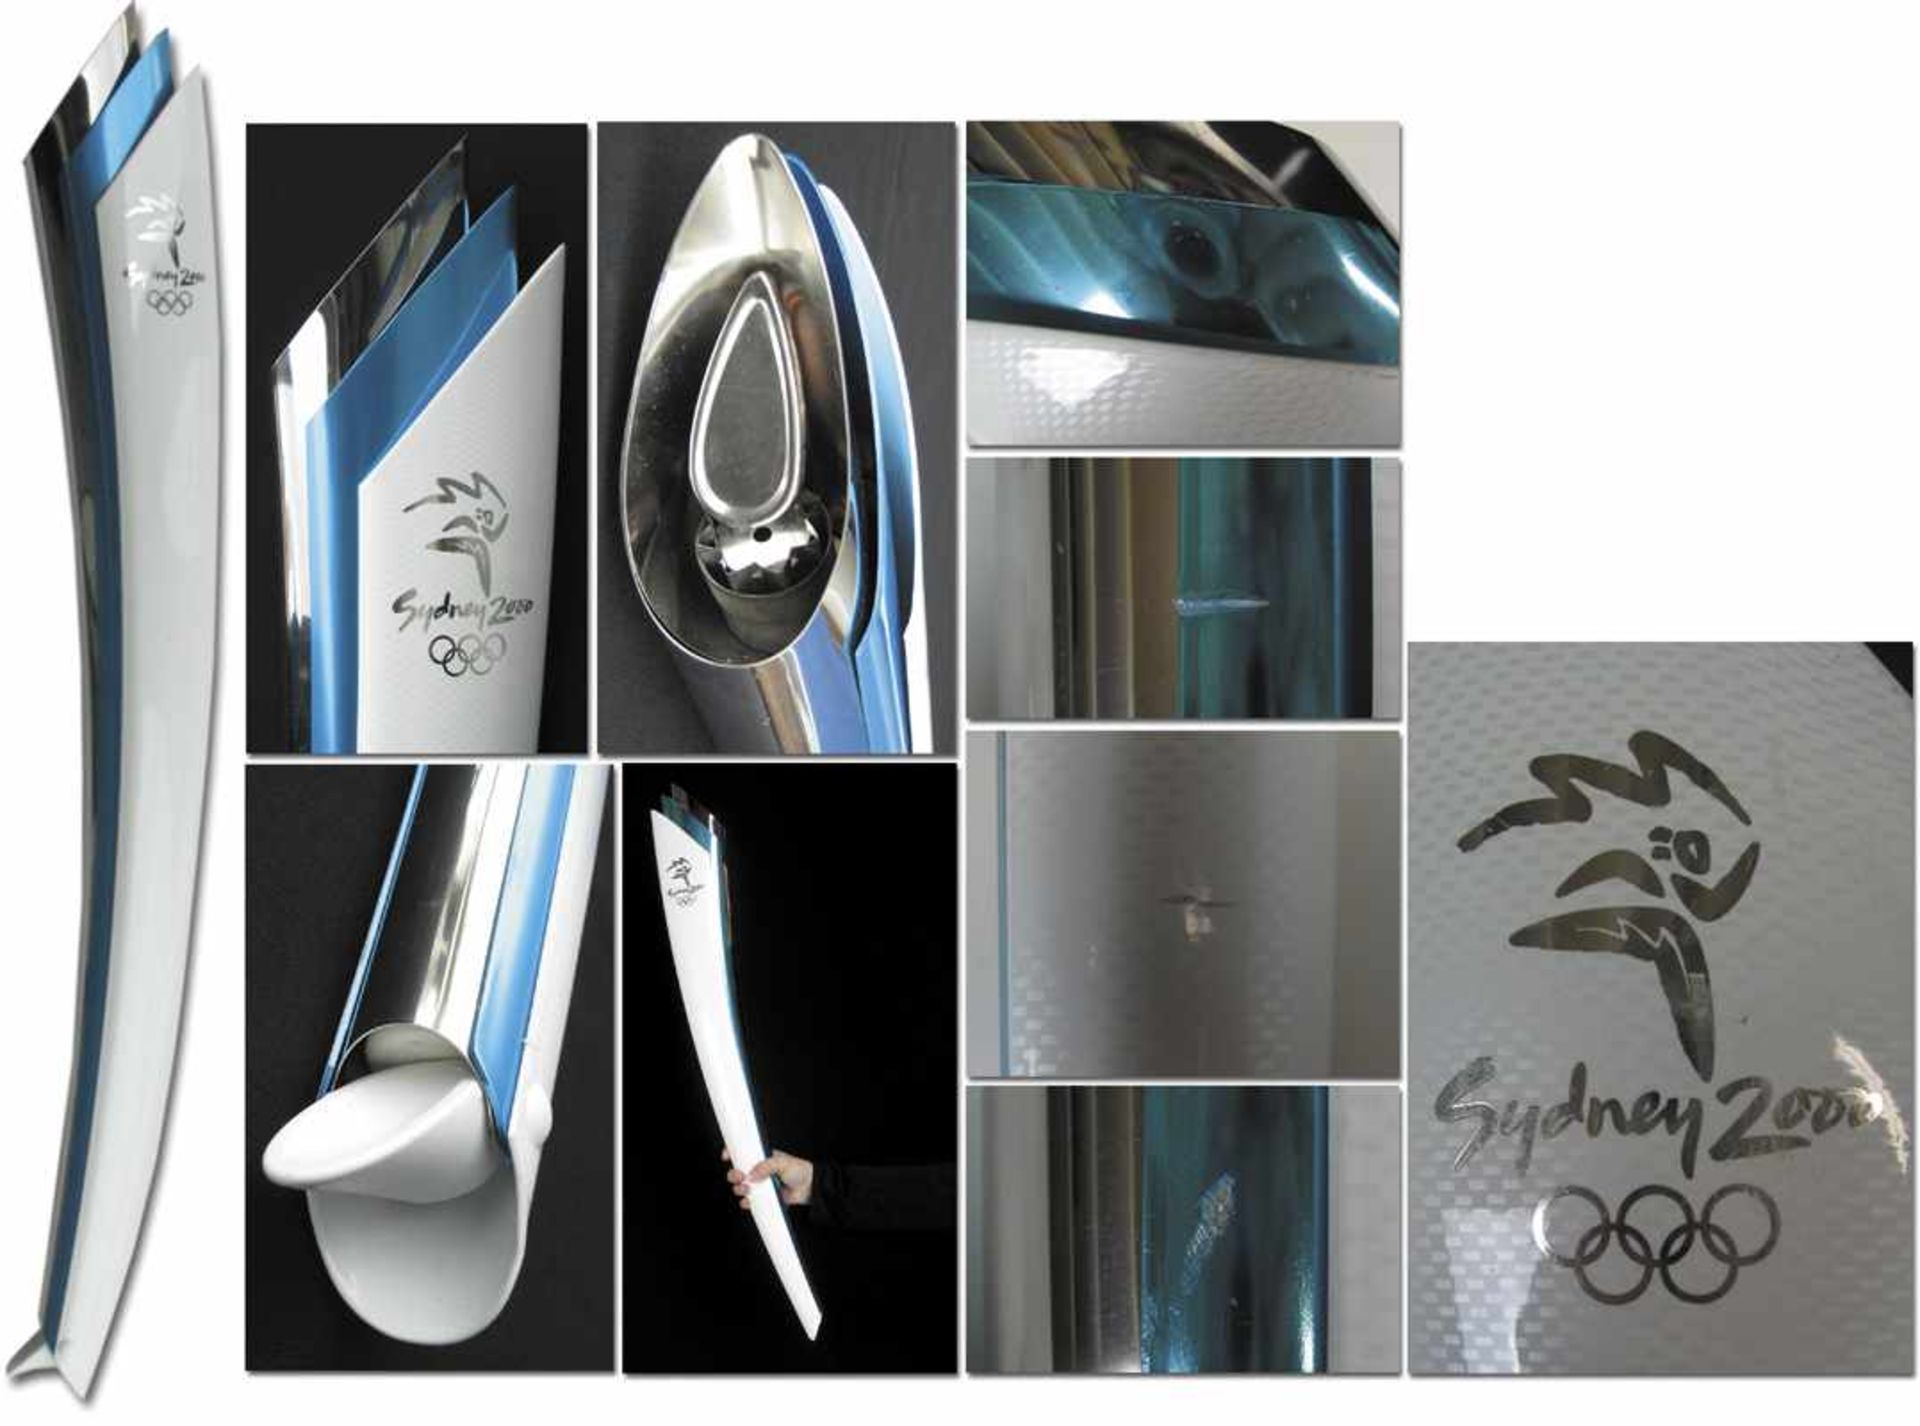 Olmypic Games 2000. Official Torch Sydney - Official Olympic torch Sydney 2000. Stainless steel